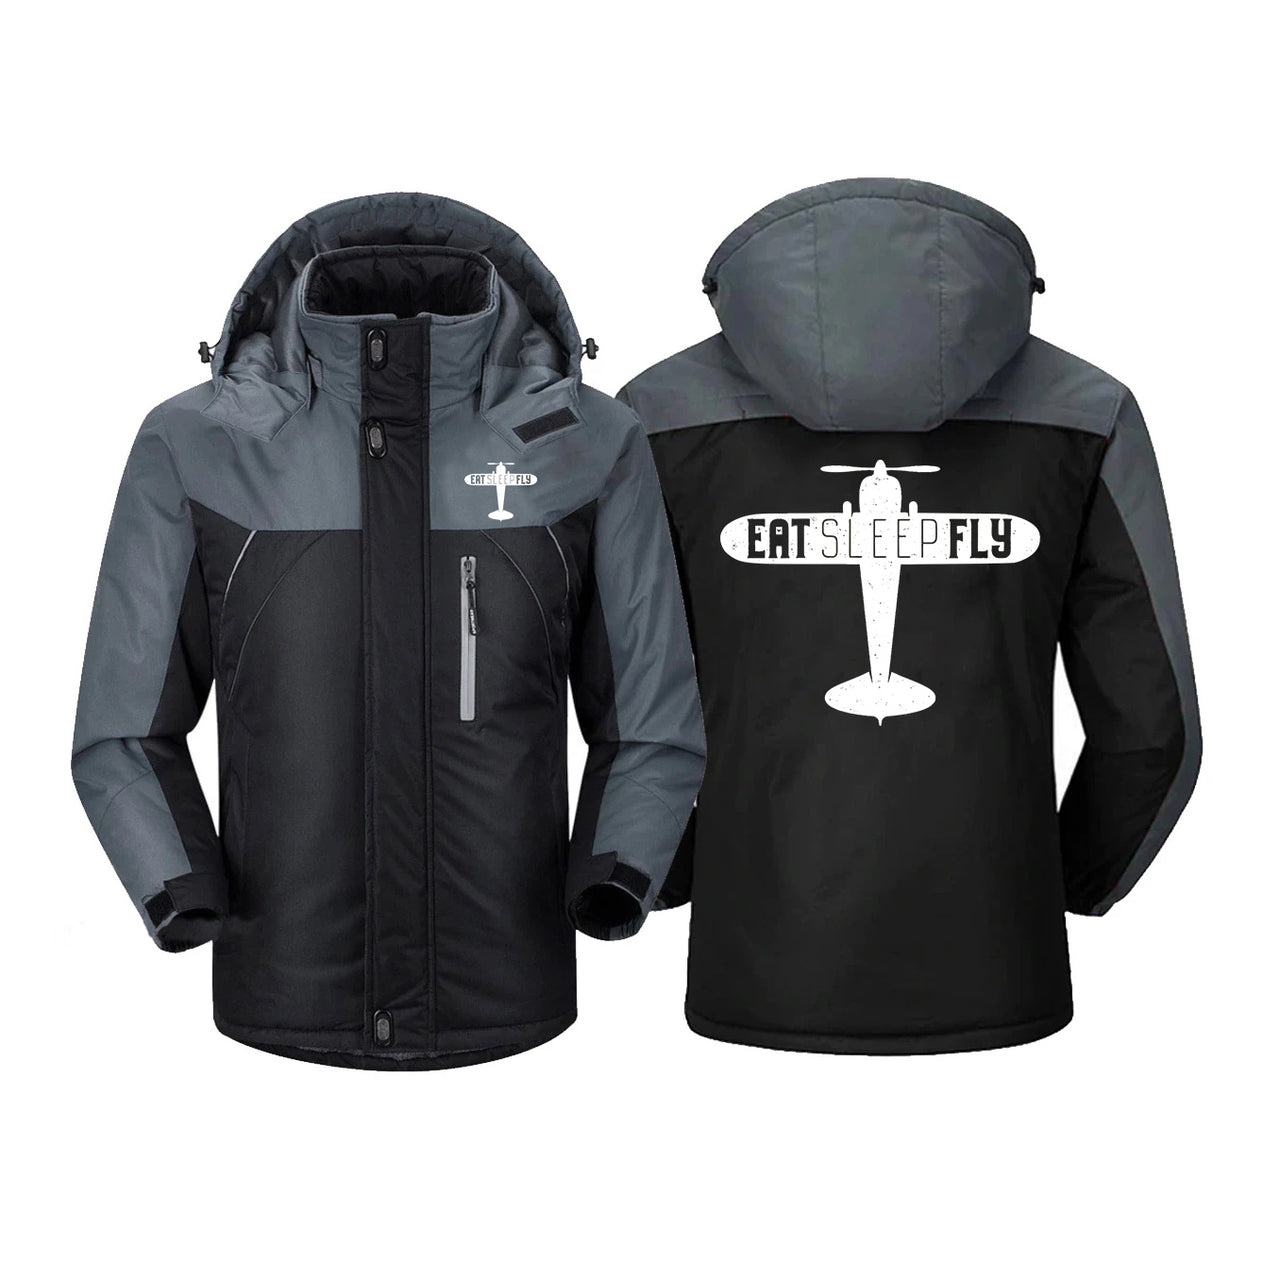 Eat Sleep Fly & Propeller Designed Thick Winter Jackets